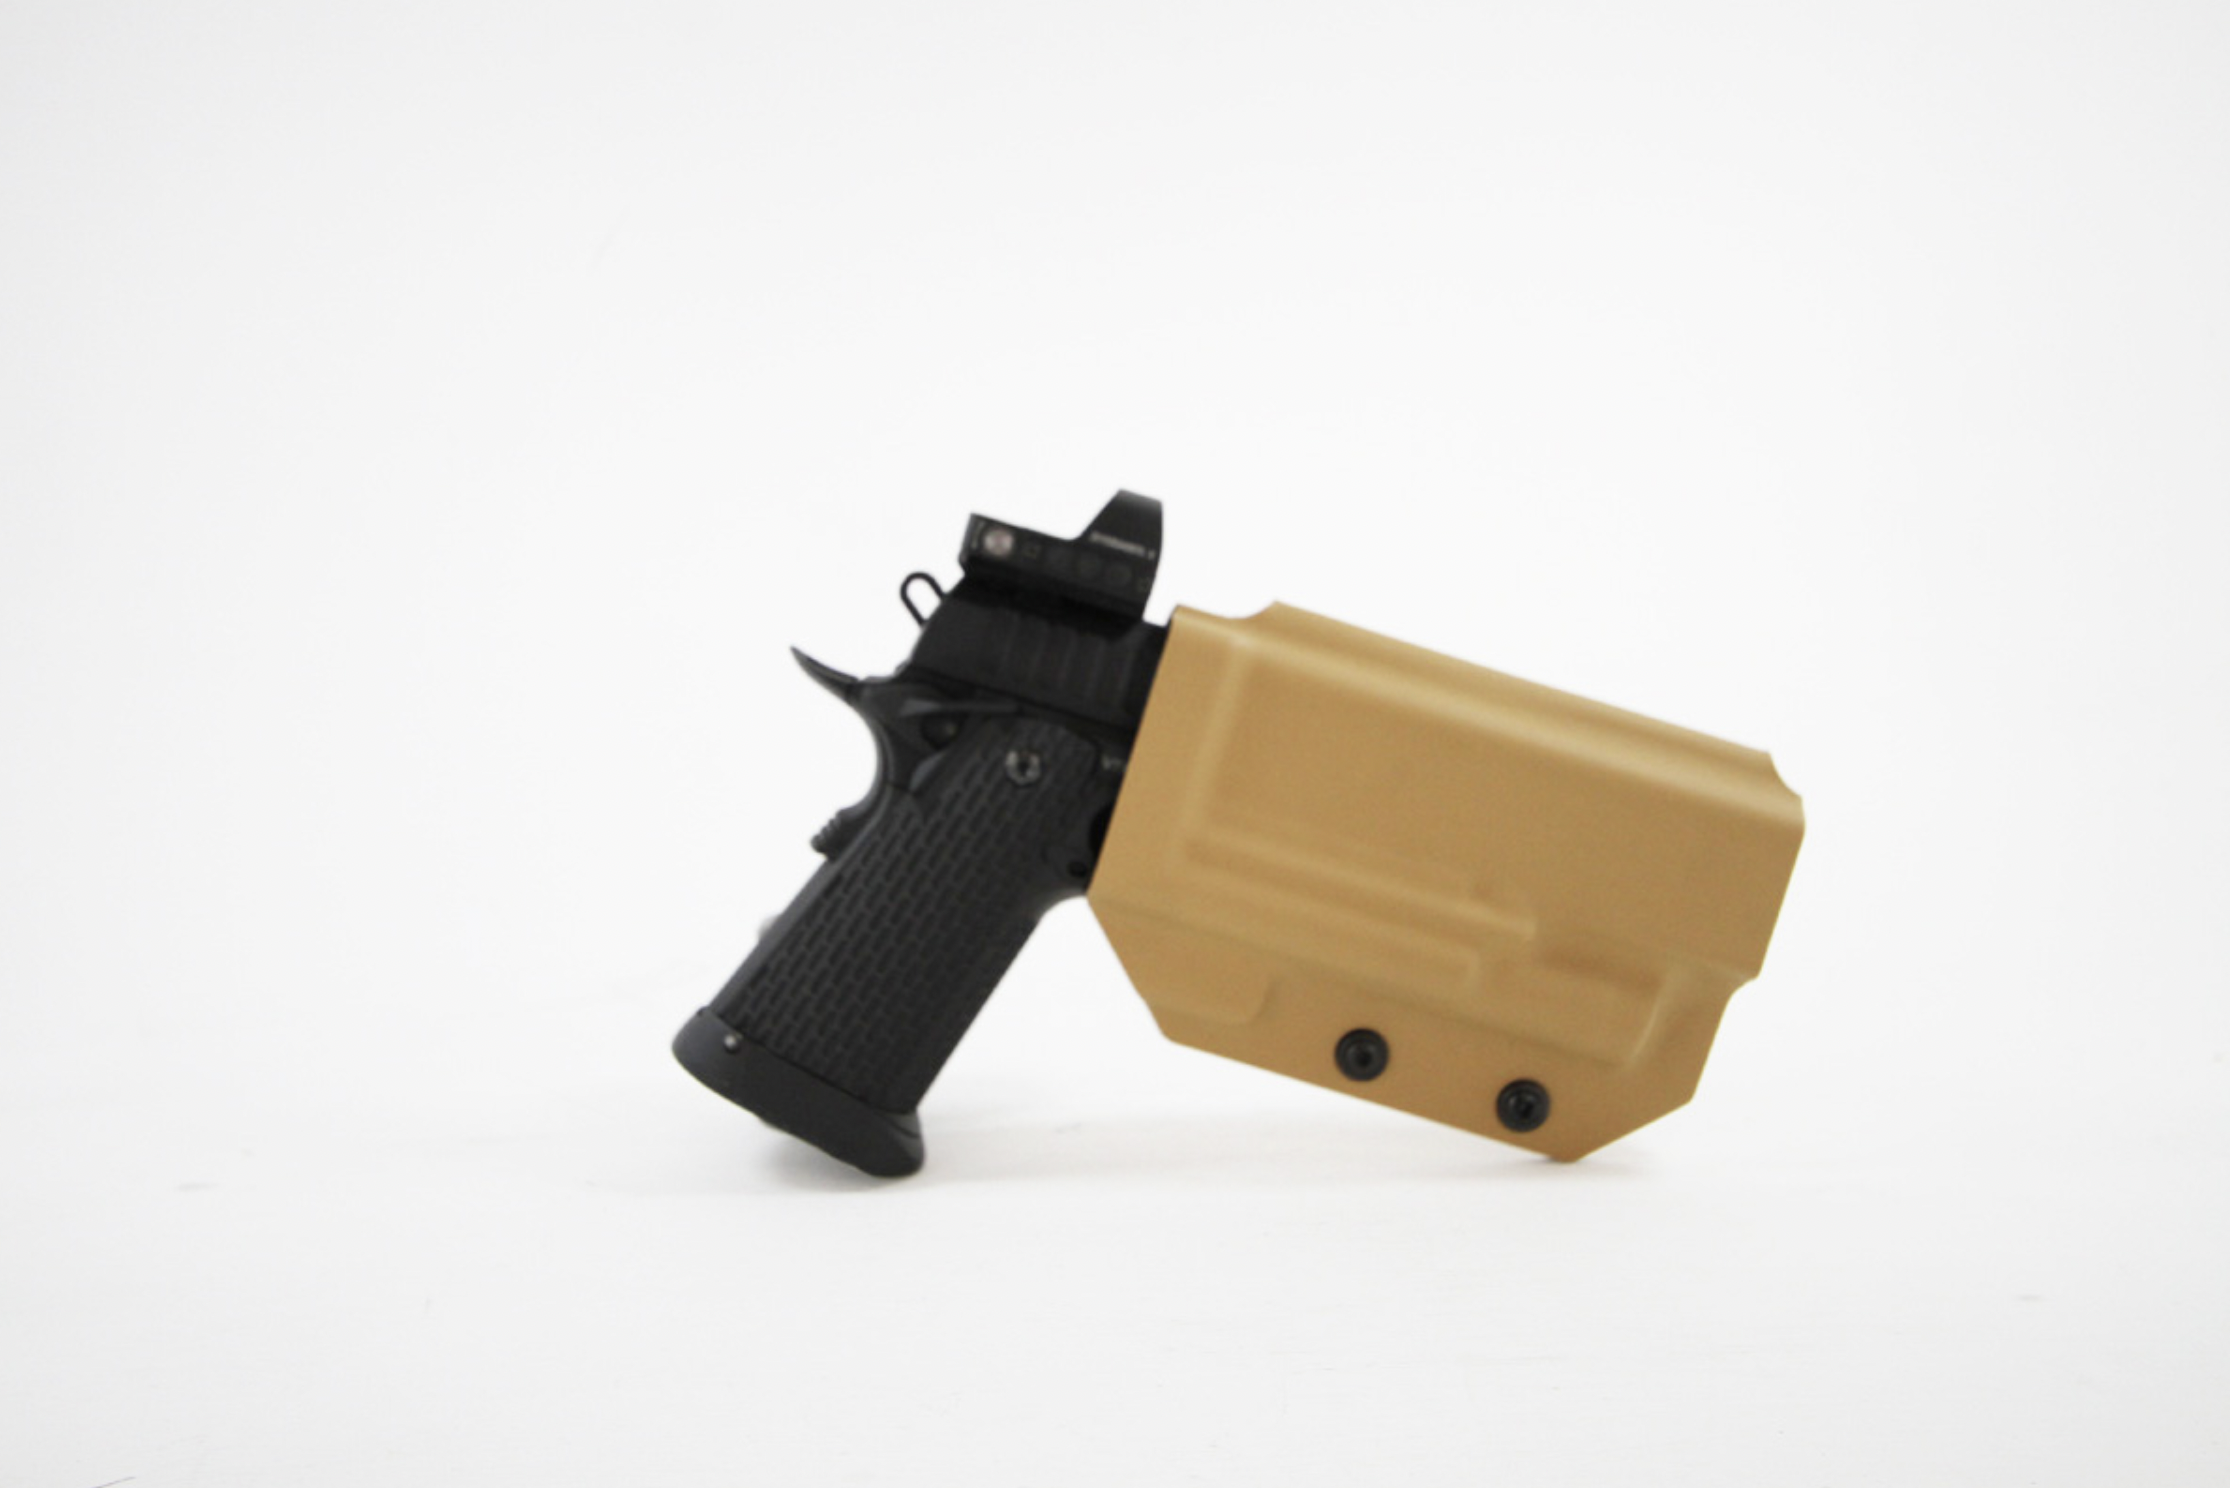 Bravo Airsoft Kydex Holster for Pistol with Flashlights — JAG Precision  Inc